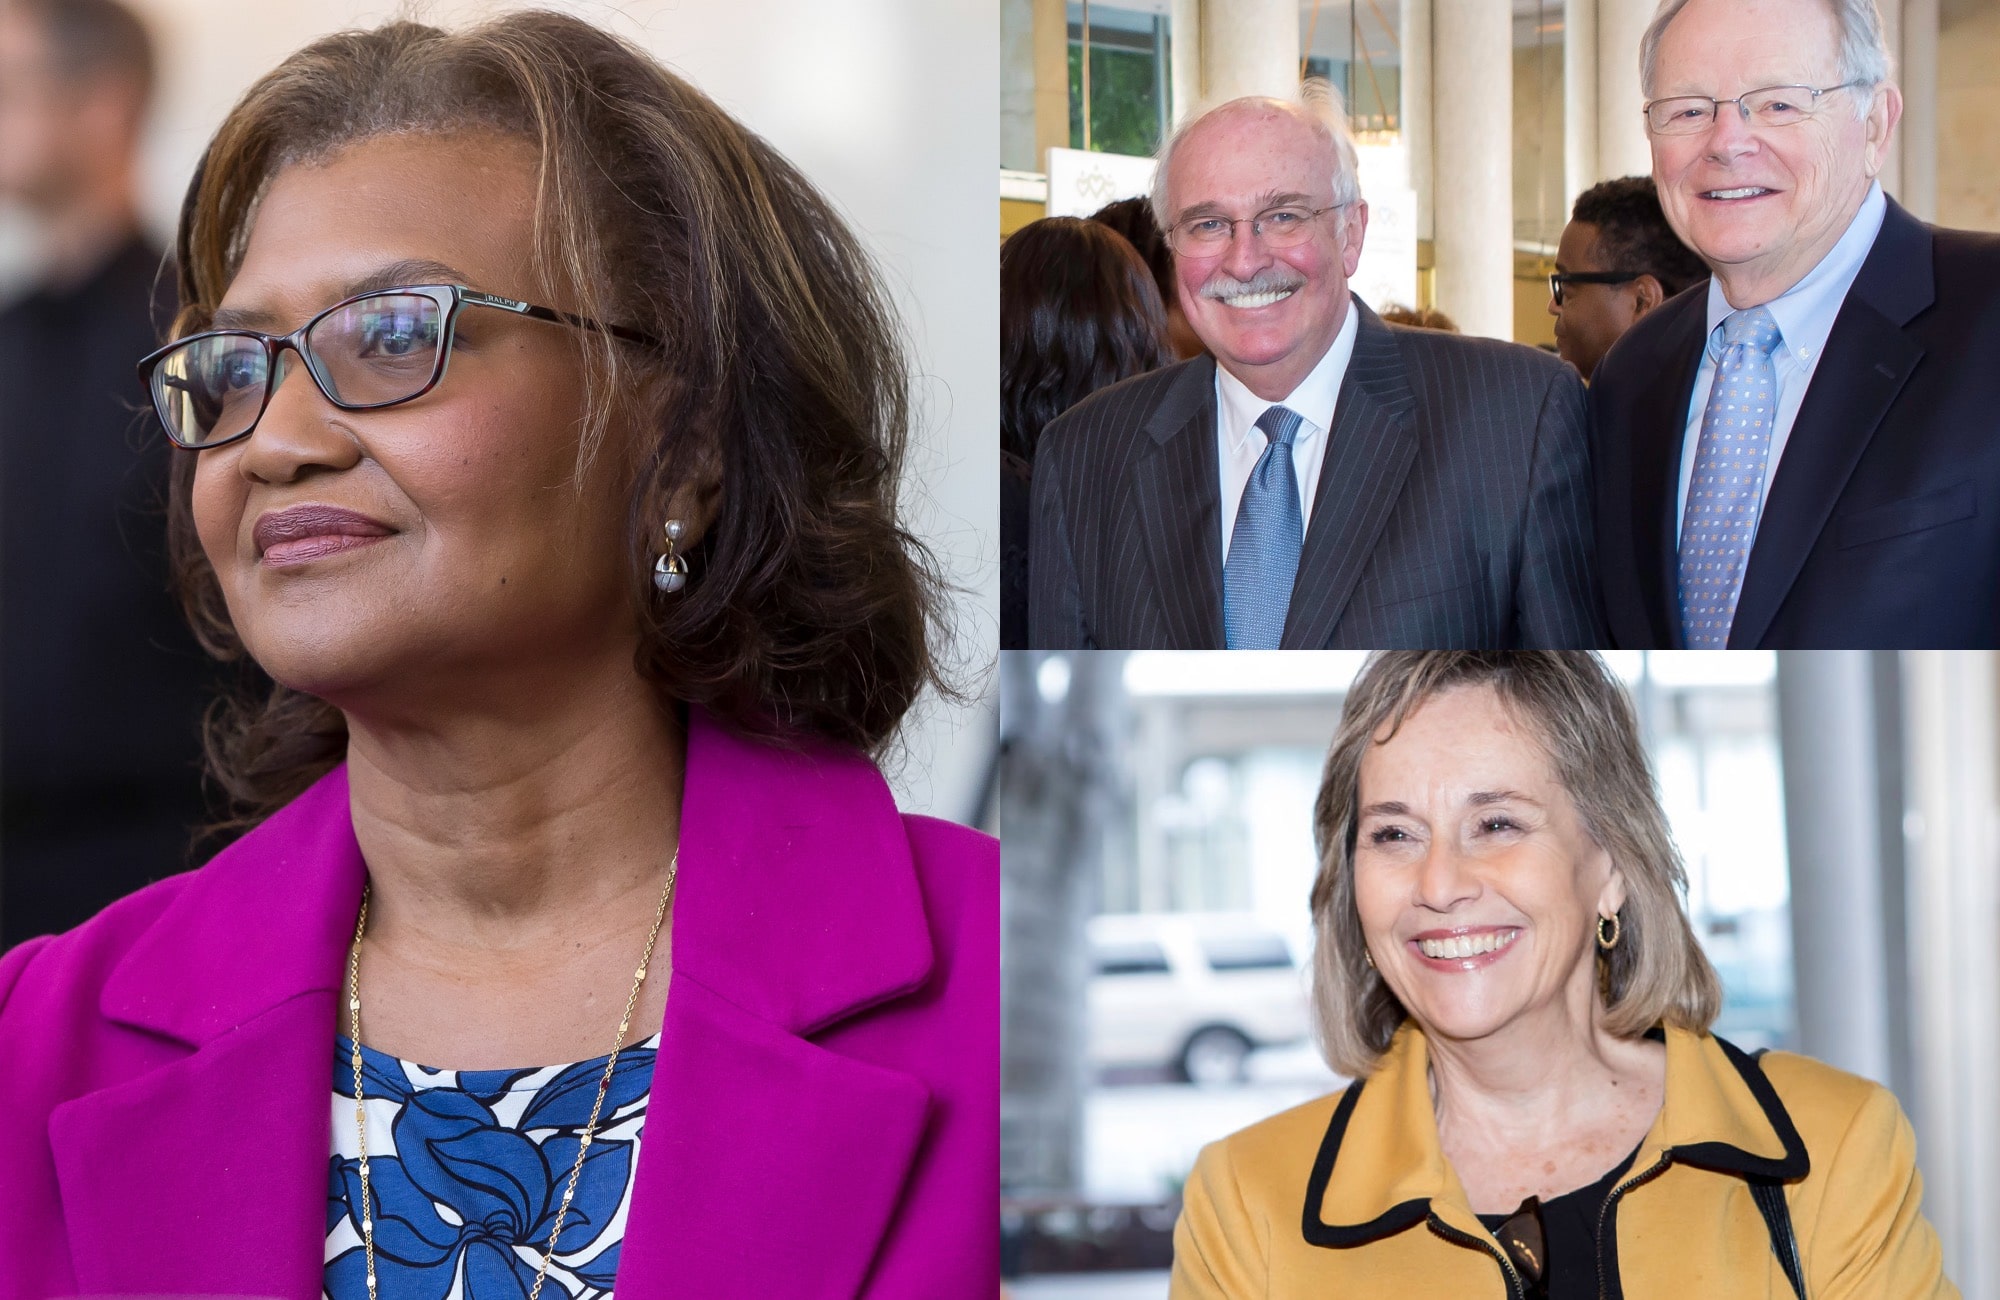 Collage with Dr. Elaine Batchlor, a Black woman, two smiling older white men in suits, a white woman smiling in a yellow jacket